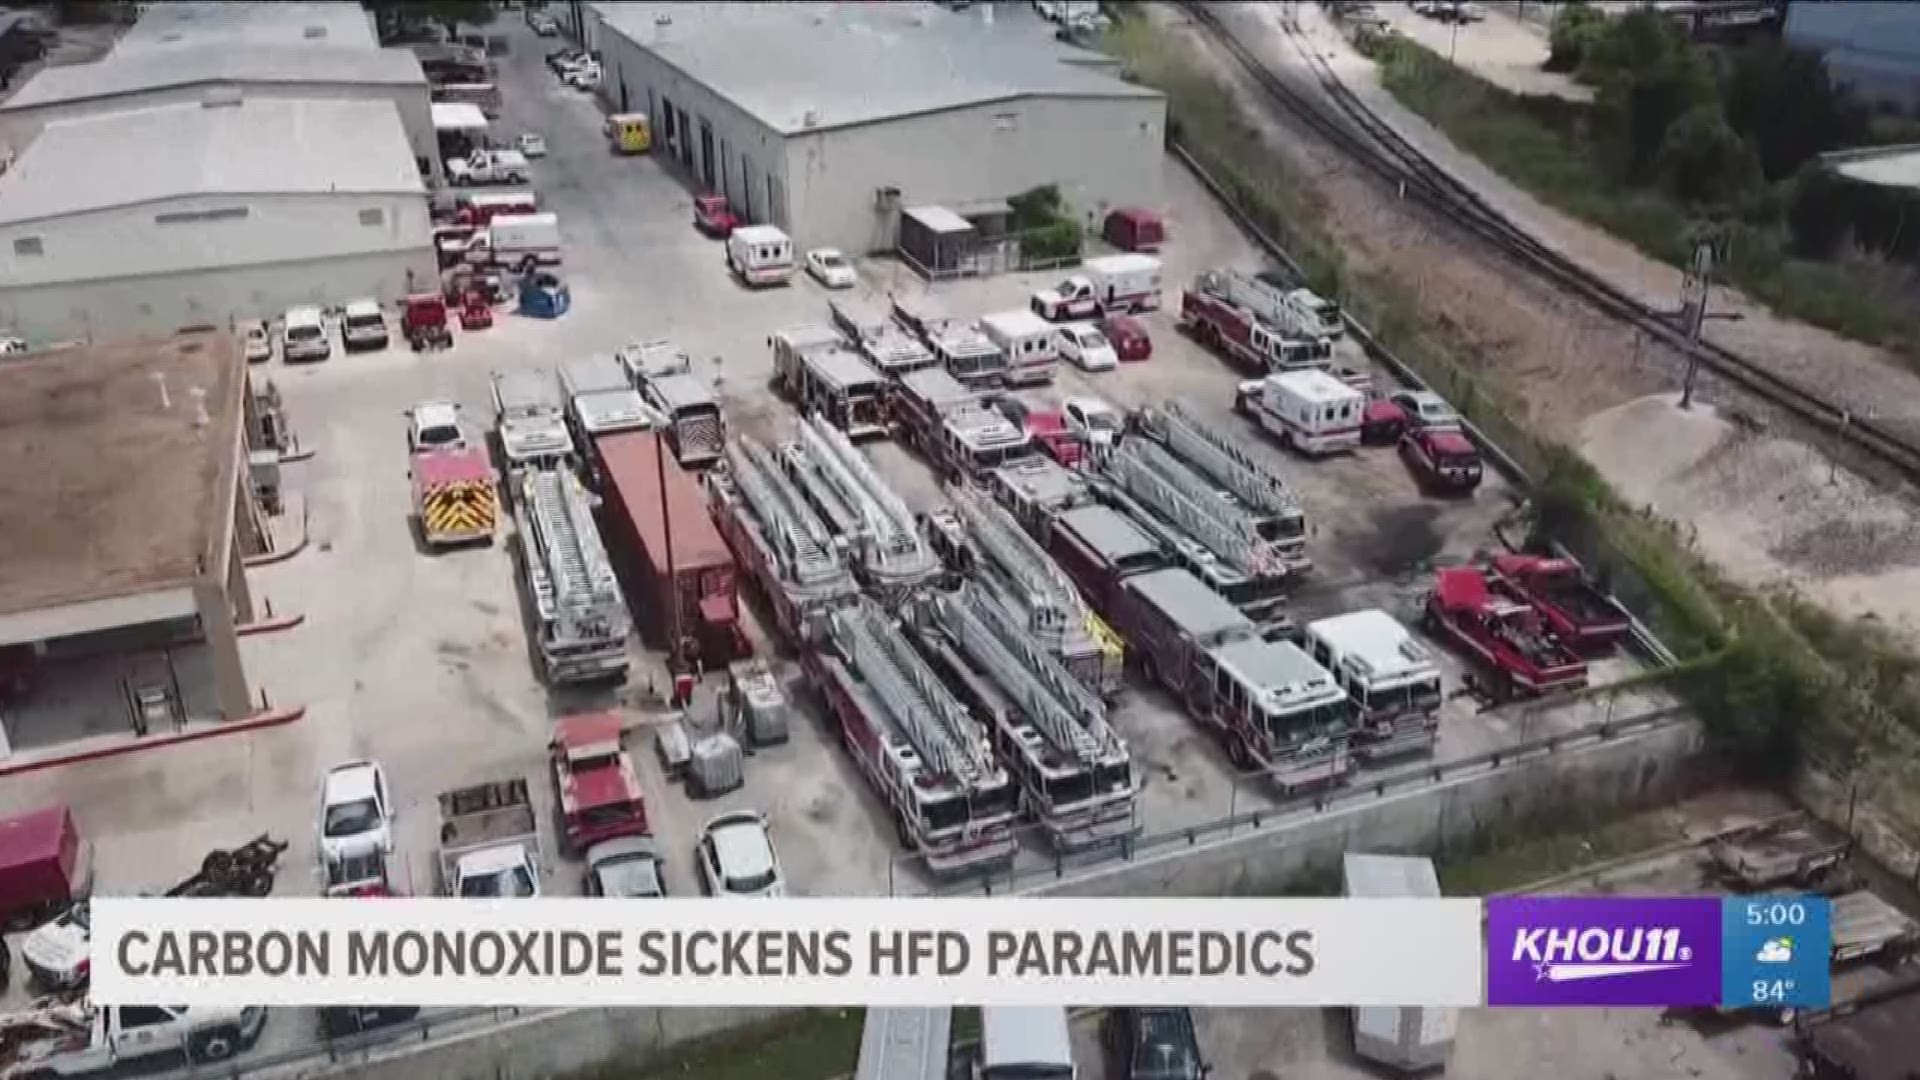 Two Houston firefighters were treated Thursday evening after they were exposed to carbon monoxide in the ambulance they were driving.